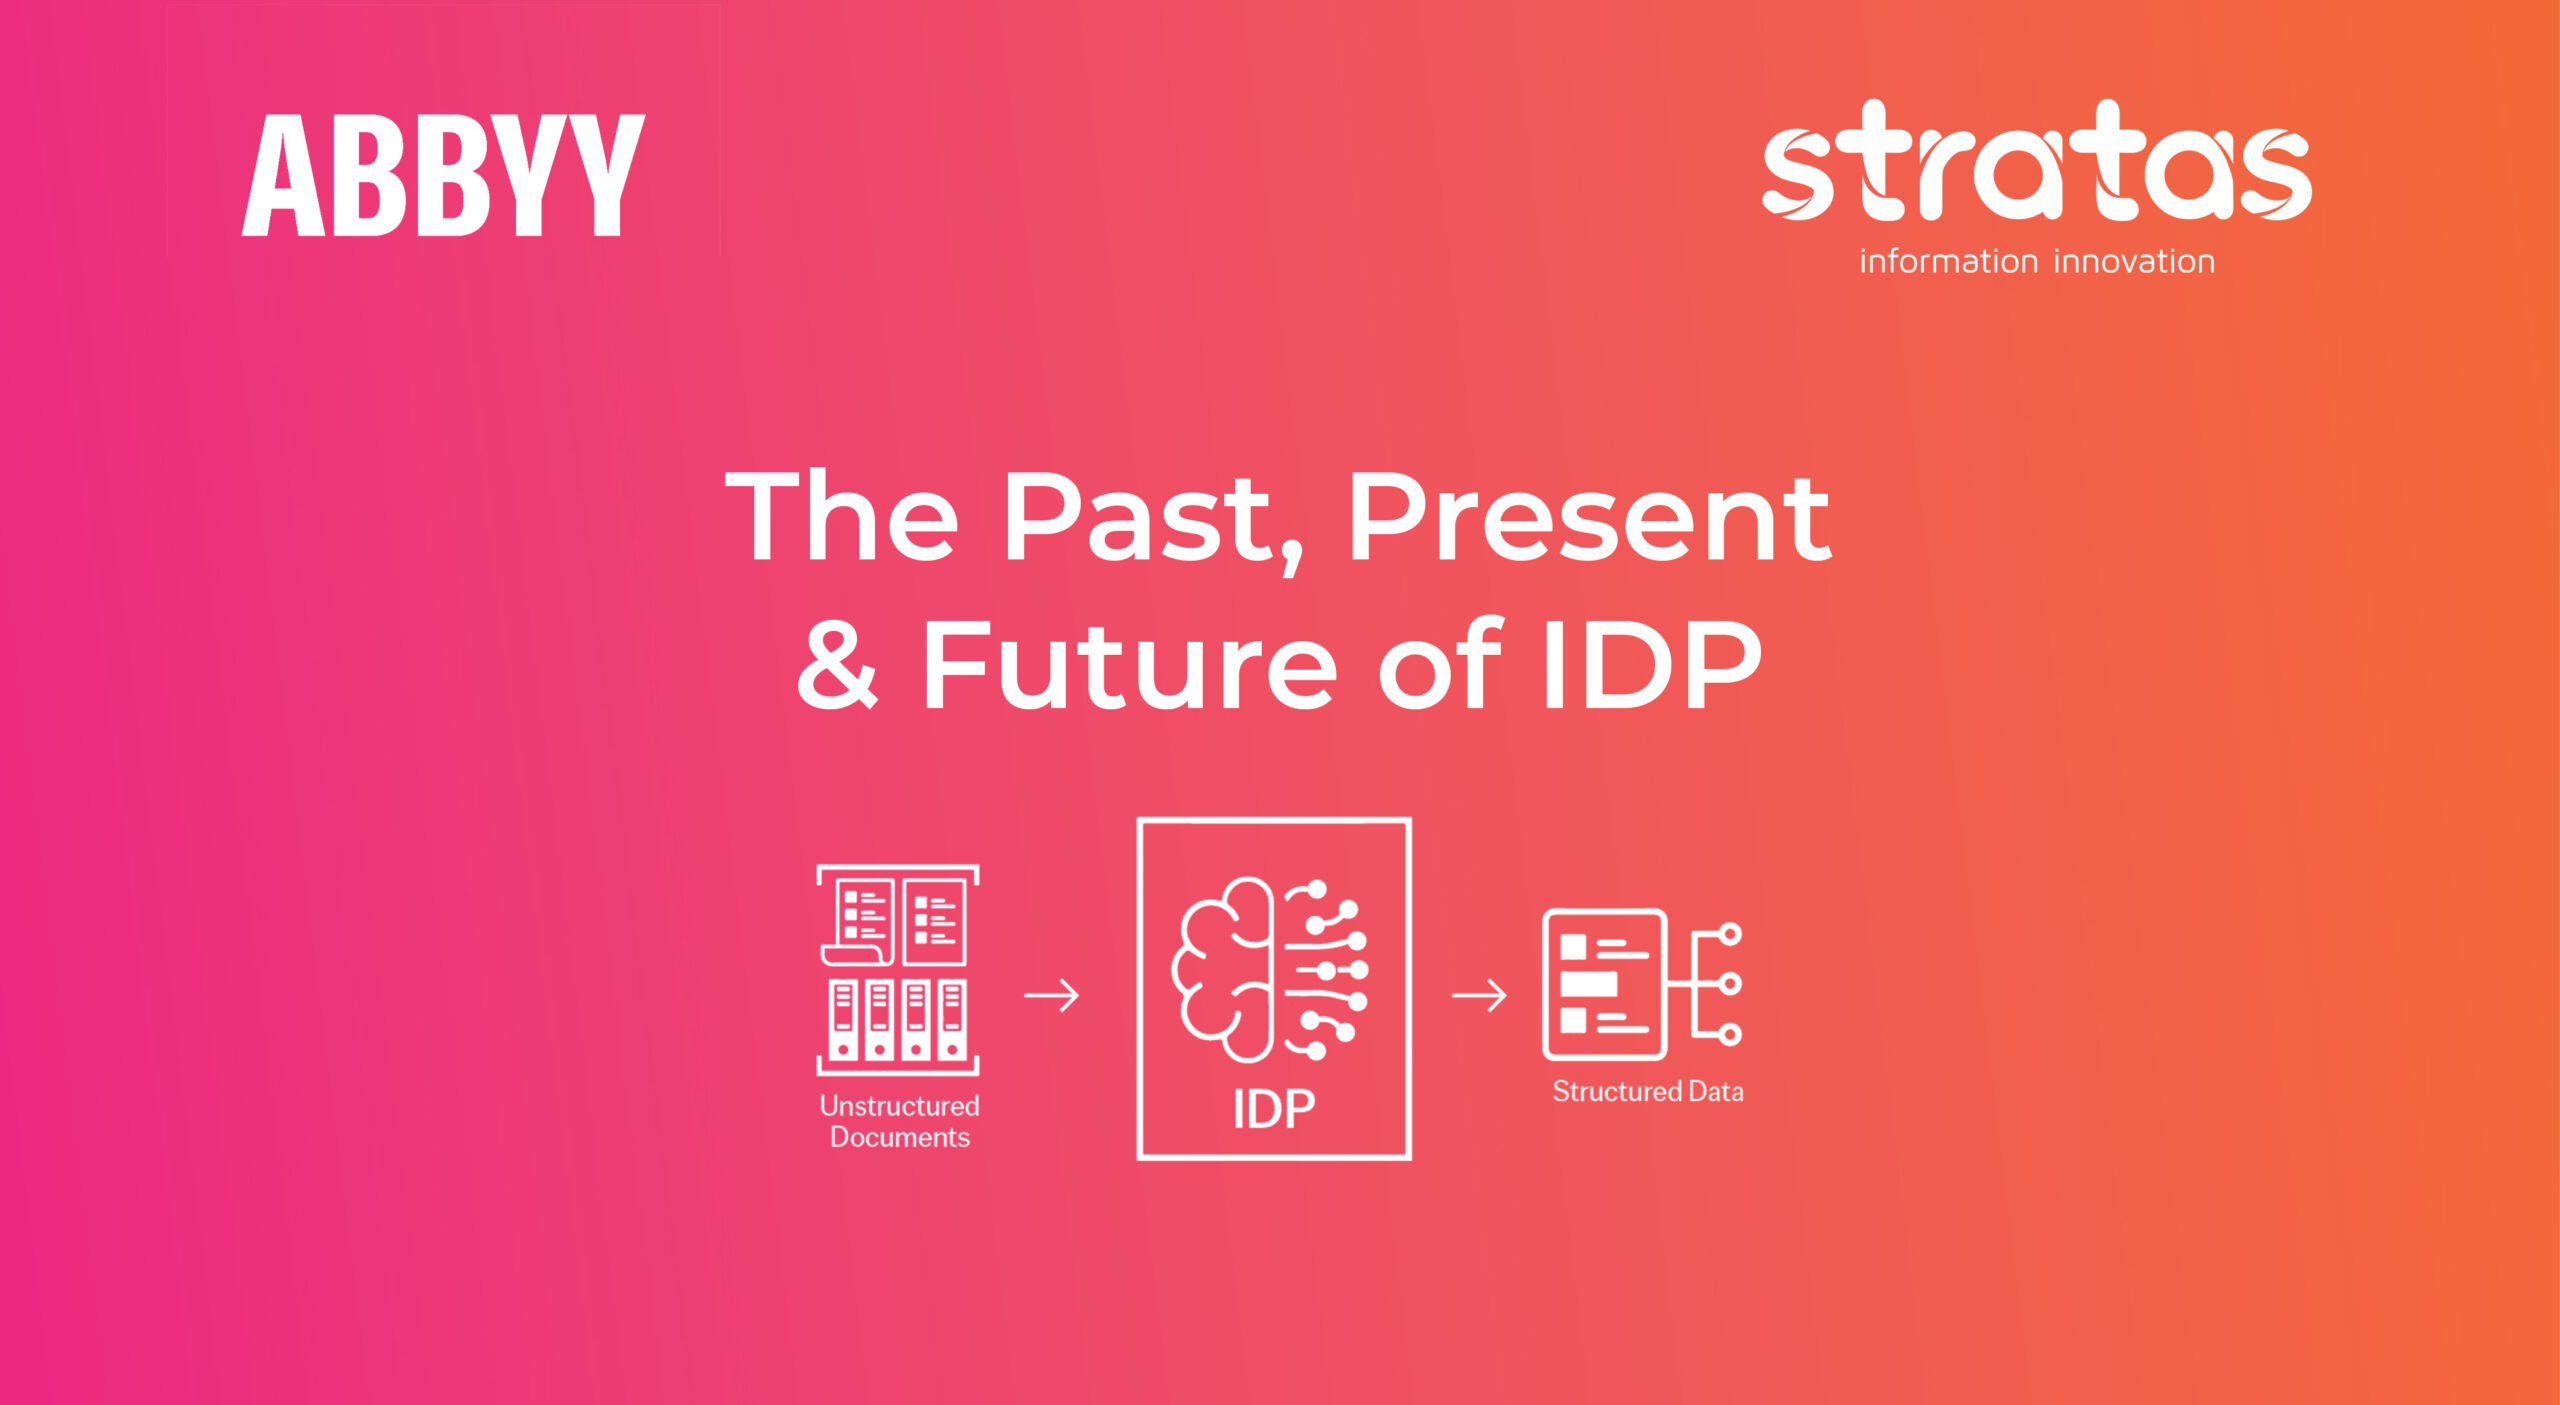 The Past, Present & Future of IDP